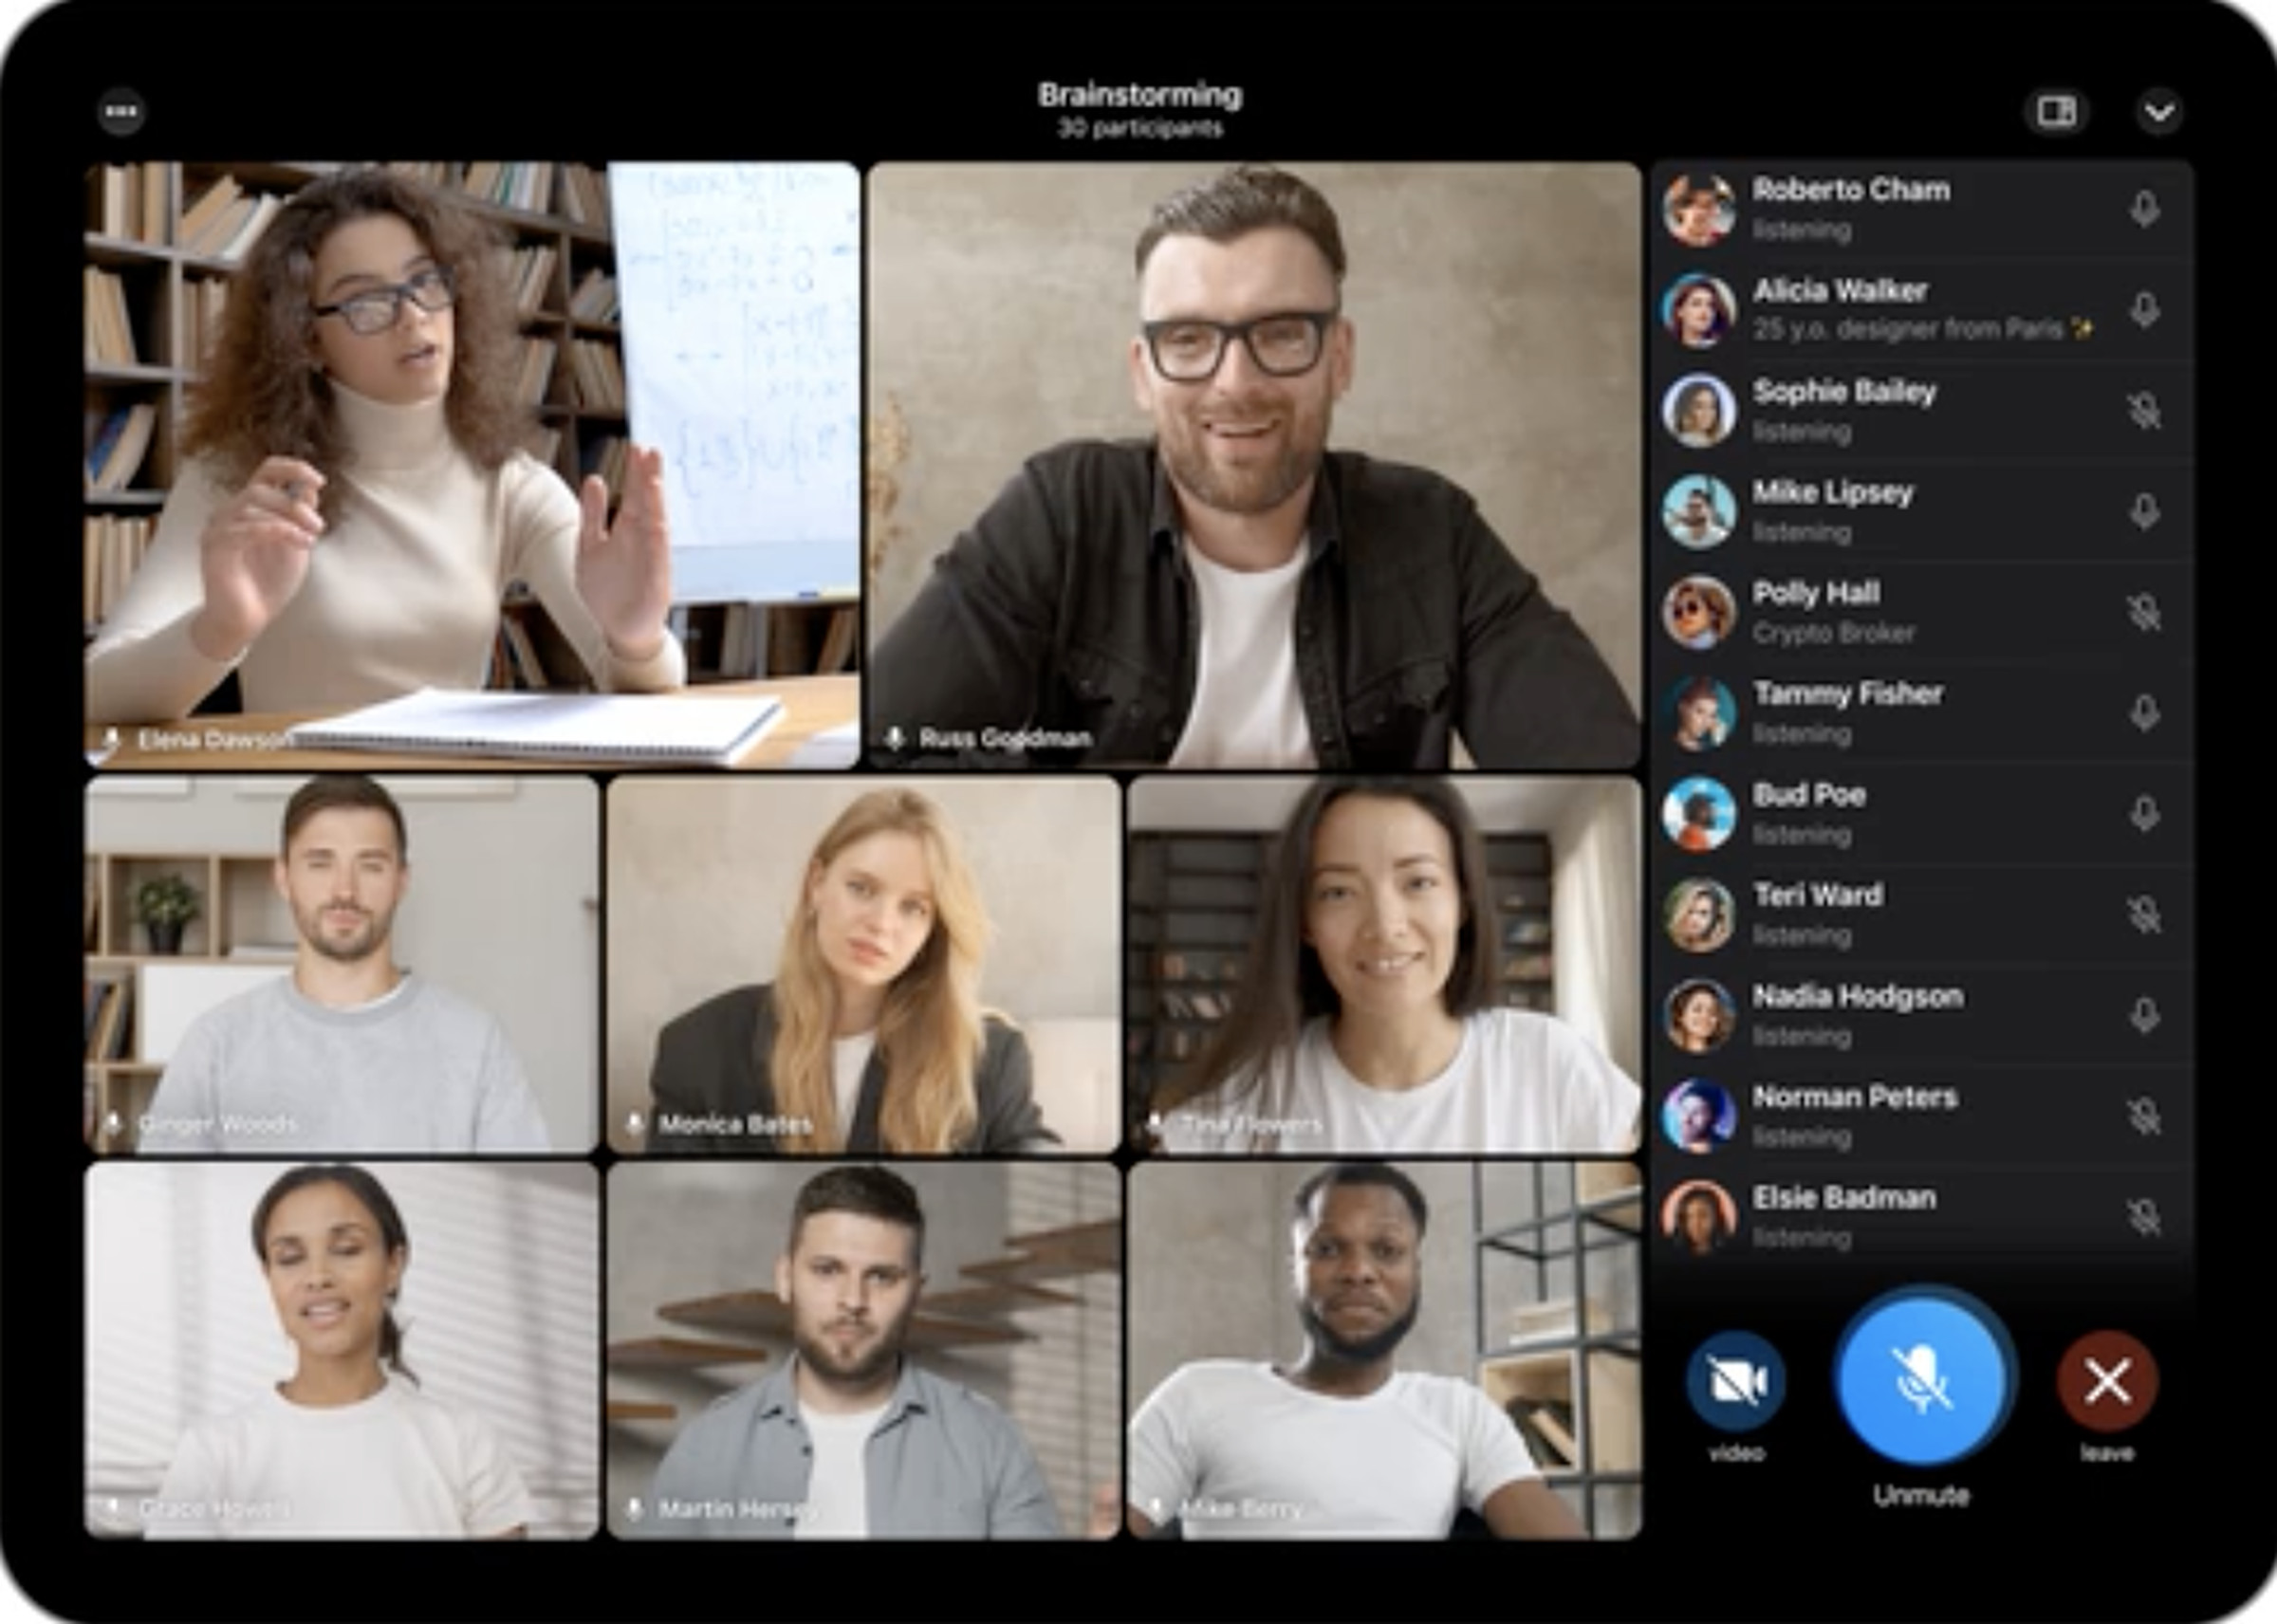 Telegram has introduced group video chats.